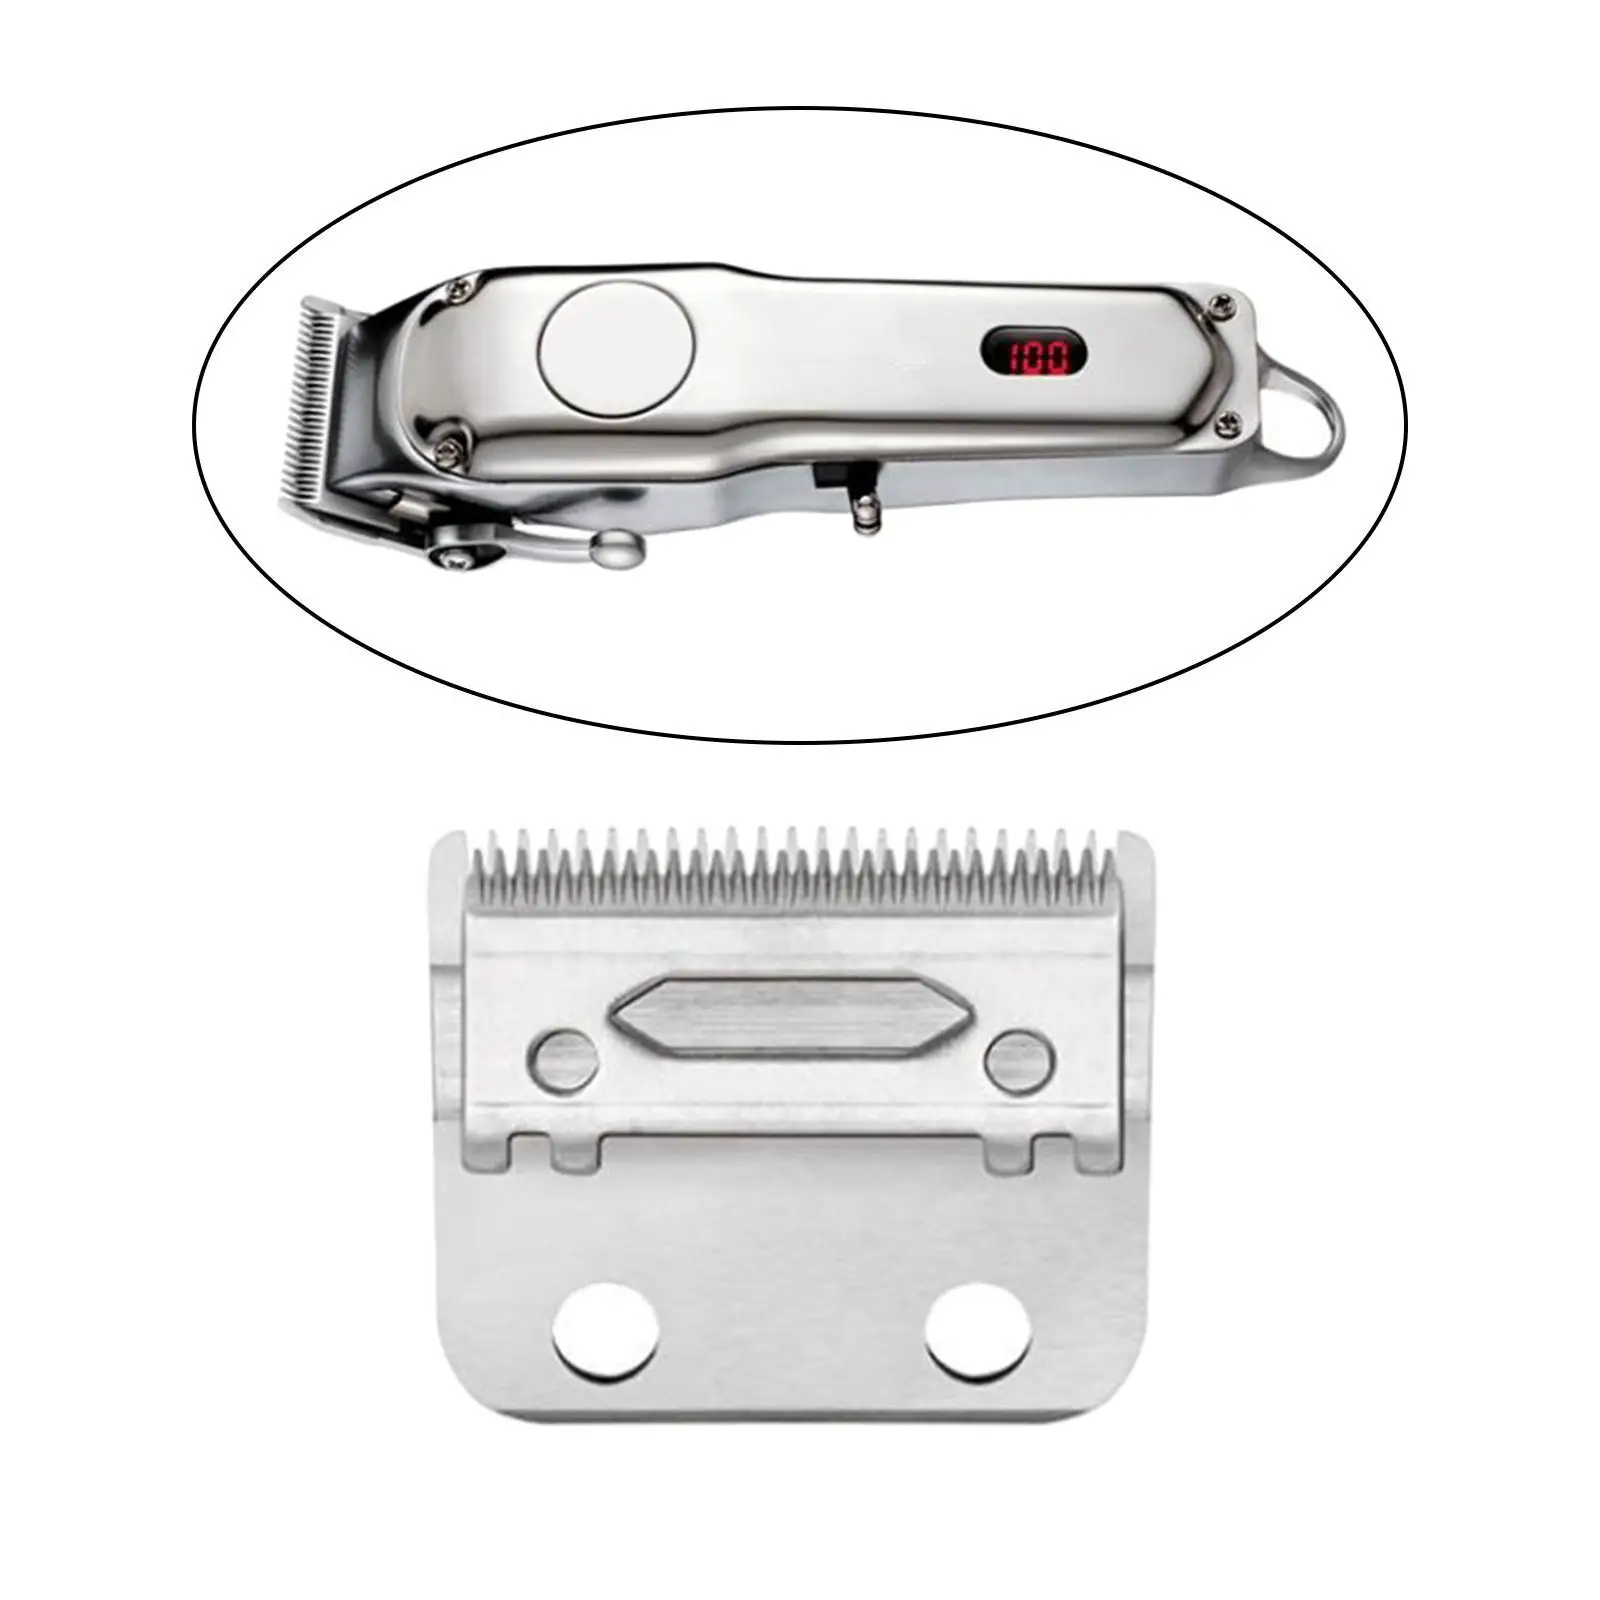 Stainless Steel  Clipper Blade, Cutter blade,  for Men Haircut Tool, 12mm Length